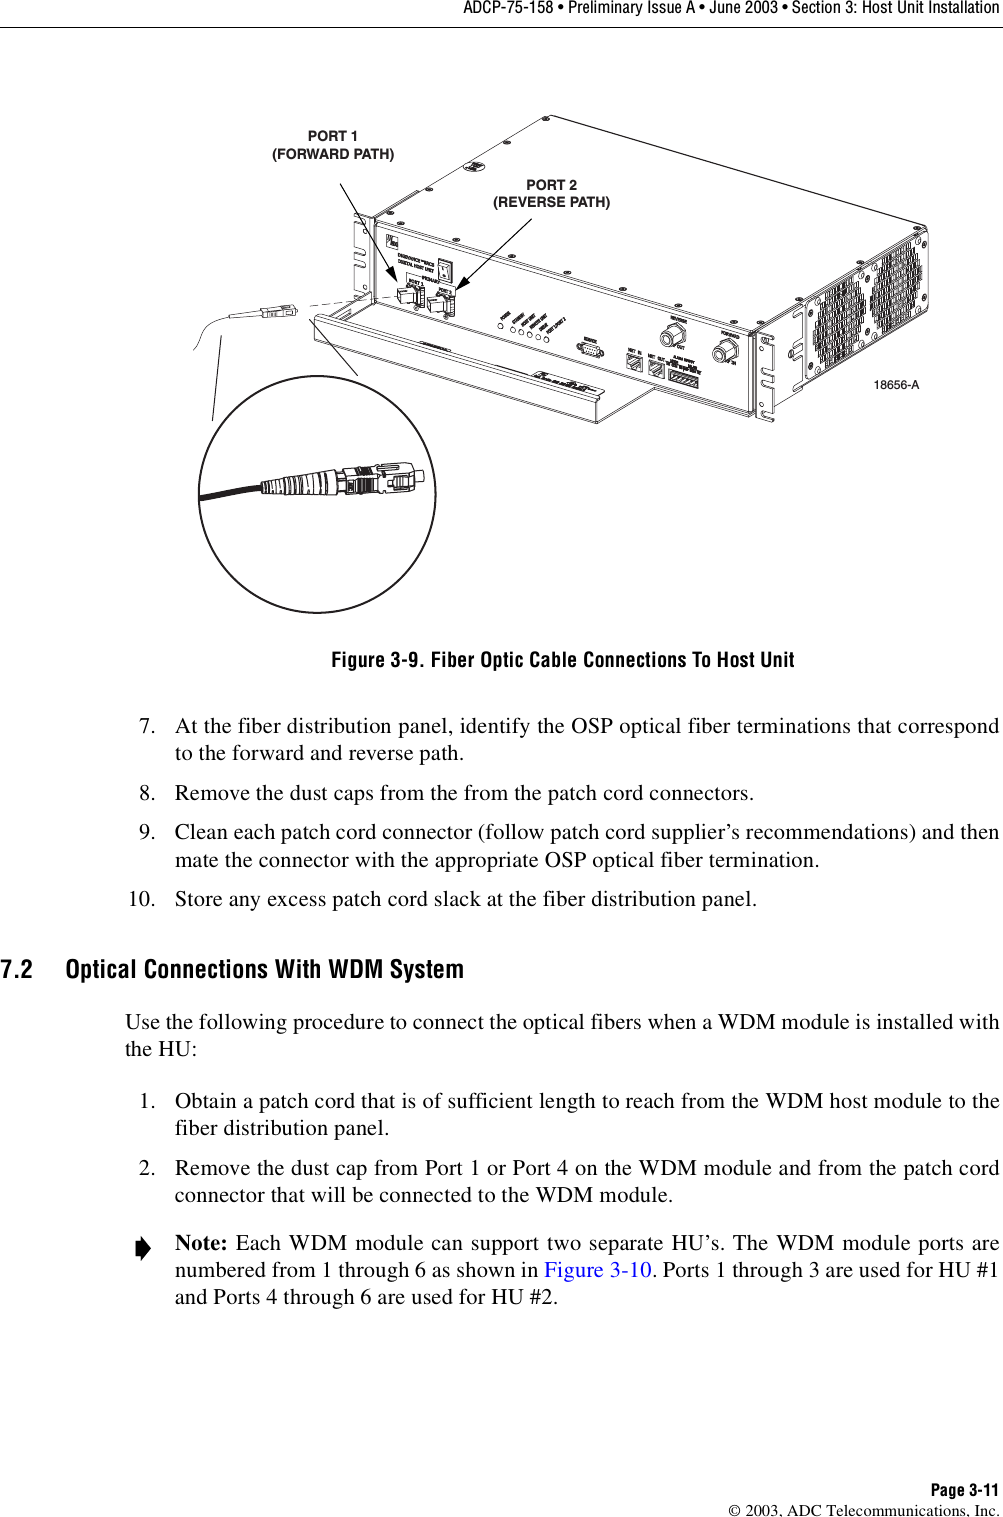 ADCP-75-158 • Preliminary Issue A • June 2003 • Section 3: Host Unit InstallationPage 3-11© 2003, ADC Telecommunications, Inc.Figure 3-9. Fiber Optic Cable Connections To Host Unit7. At the fiber distribution panel, identify the OSP optical fiber terminations that correspondto the forward and reverse path. 8. Remove the dust caps from the from the patch cord connectors. 9. Clean each patch cord connector (follow patch cord supplier’s recommendations) and thenmate the connector with the appropriate OSP optical fiber termination. 10. Store any excess patch cord slack at the fiber distribution panel. 7.2 Optical Connections With WDM SystemUse the following procedure to connect the optical fibers when a WDM module is installed withthe HU: 1. Obtain a patch cord that is of sufficient length to reach from the WDM host module to thefiber distribution panel. 2. Remove the dust cap from Port 1 or Port 4 on the WDM module and from the patch cordconnector that will be connected to the WDM module. Note: Each WDM module can support two separate HU’s. The WDM module ports arenumbered from 1 through 6 as shown in Figure 3-10. Ports 1 through 3 are used for HU #1and Ports 4 through 6 are used for HU #2. 18656-APORT 1(FORWARD PATH)PORT 2(REVERSE PATH)